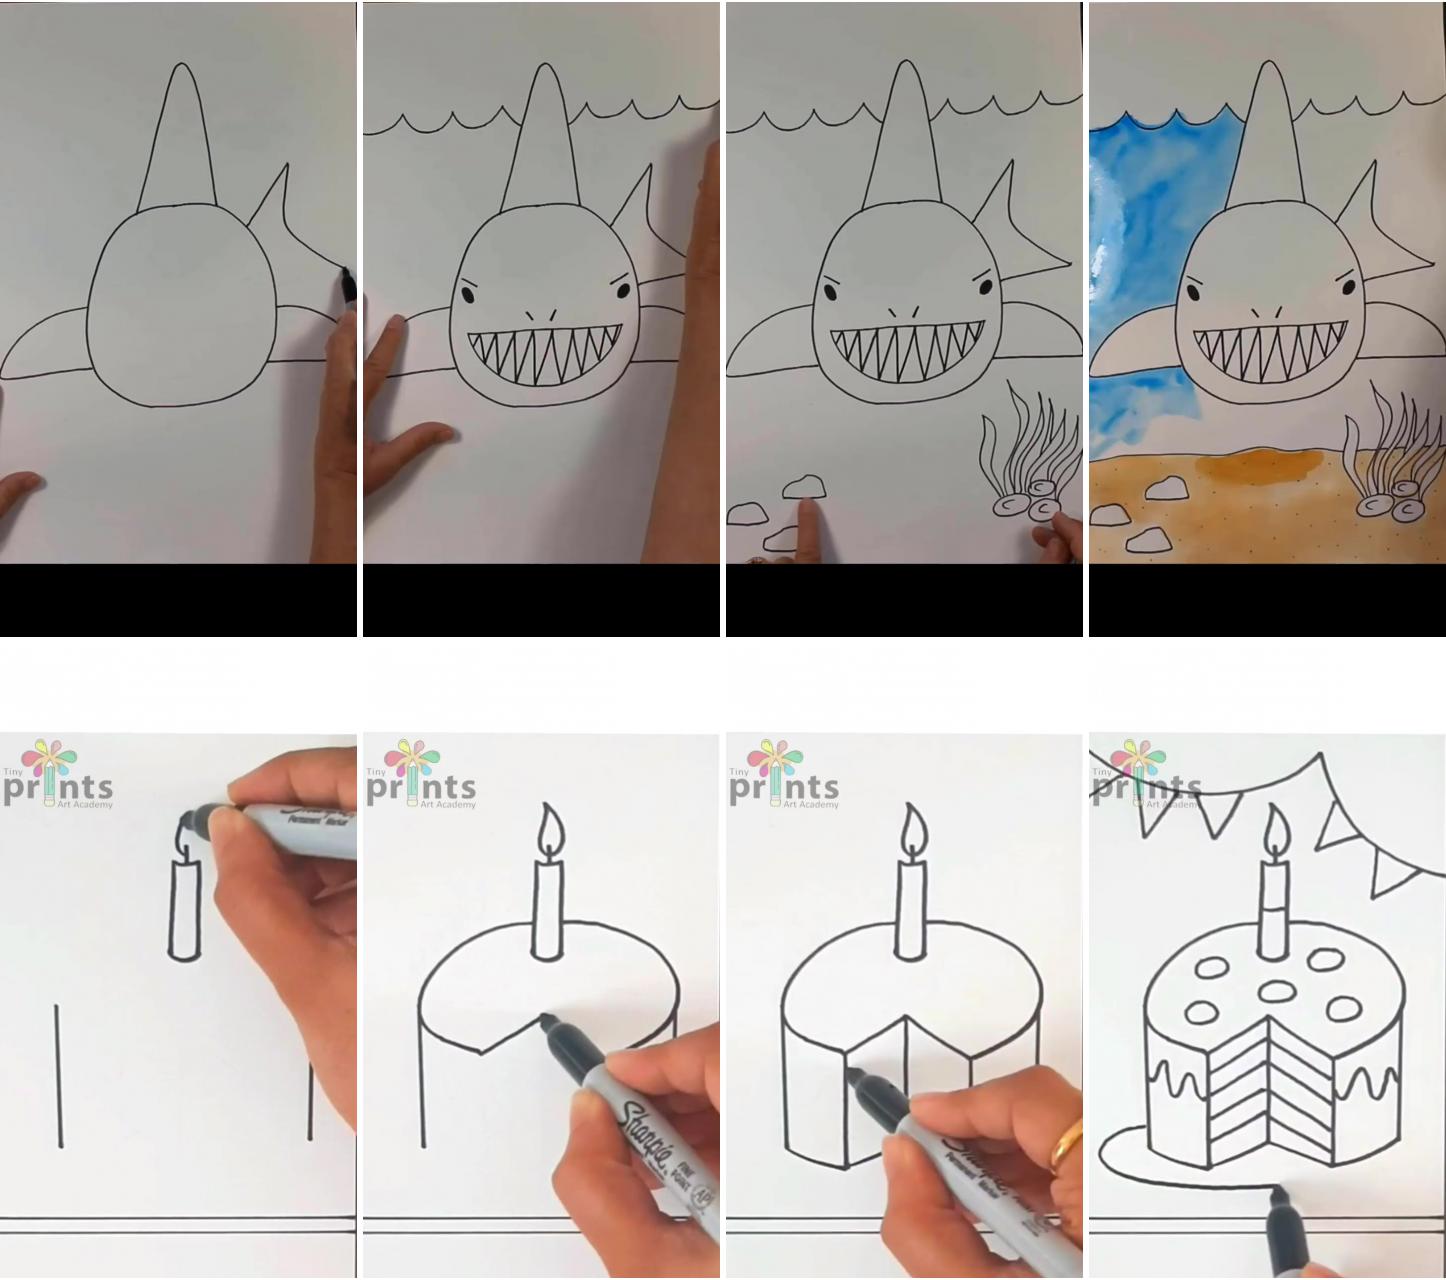 Easy art project for kids: draw & watercolor paint a stealthy shark crusin' along the ocean floor | how to draw cake for kids, easy cake drawing